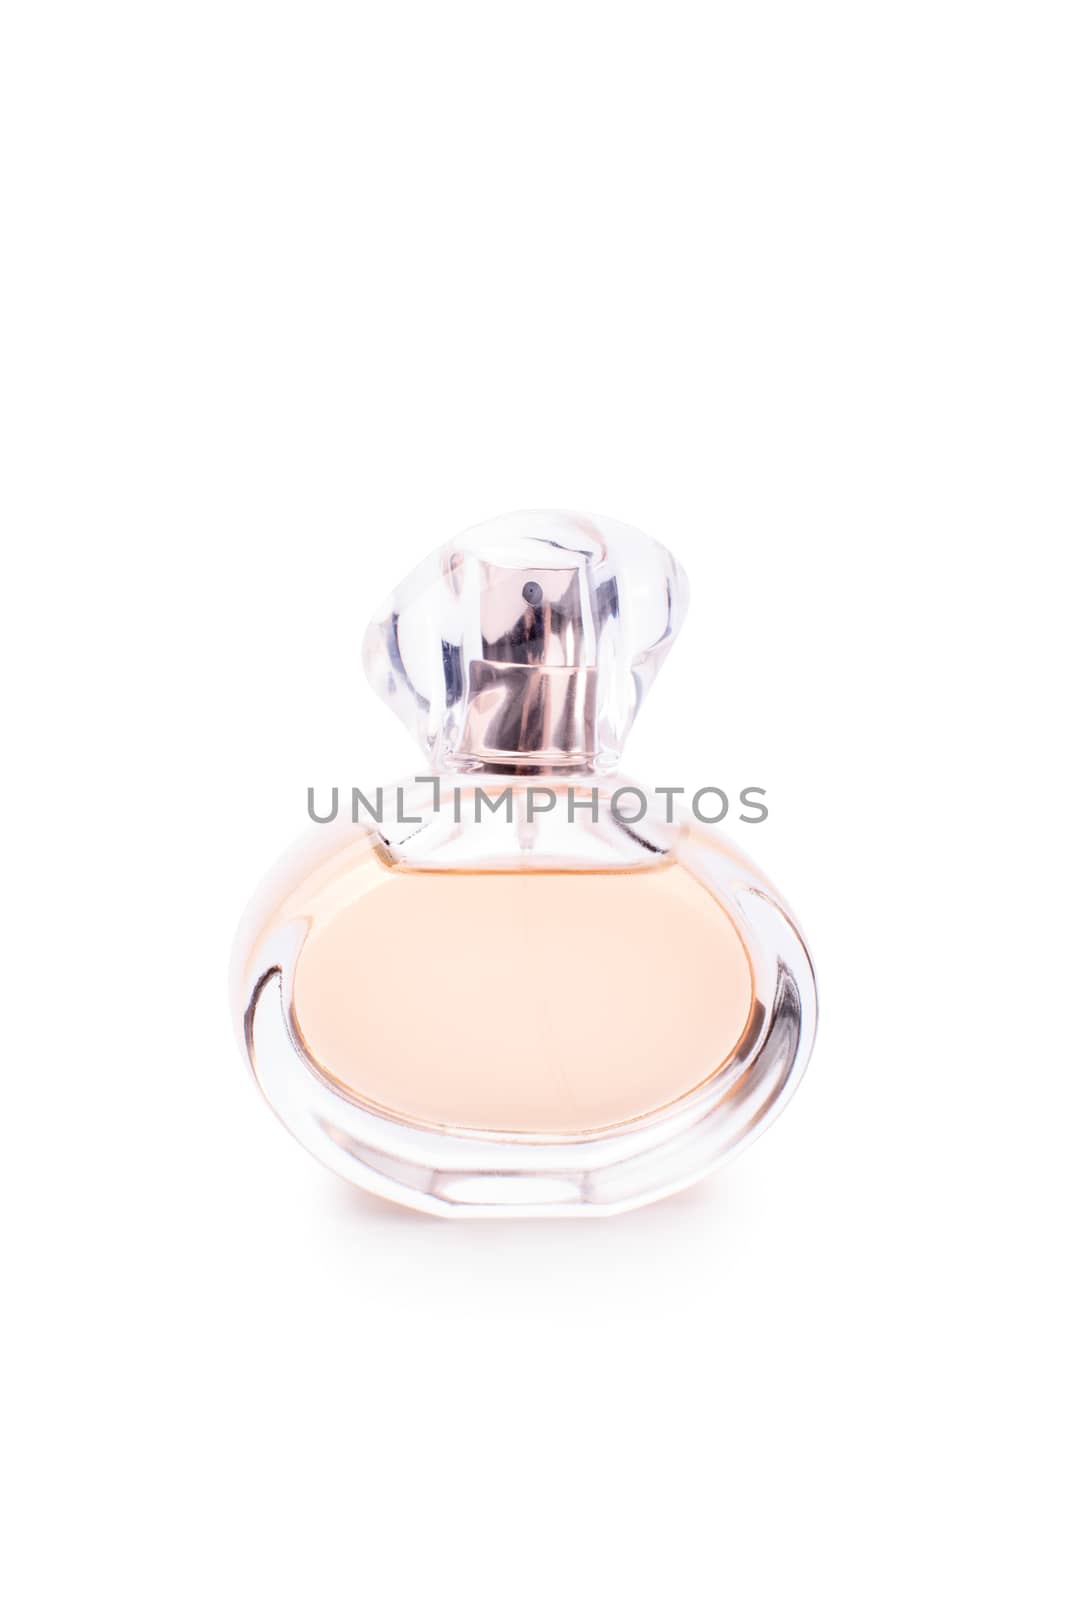 Perfume bottle isolated on white background by Mendelex